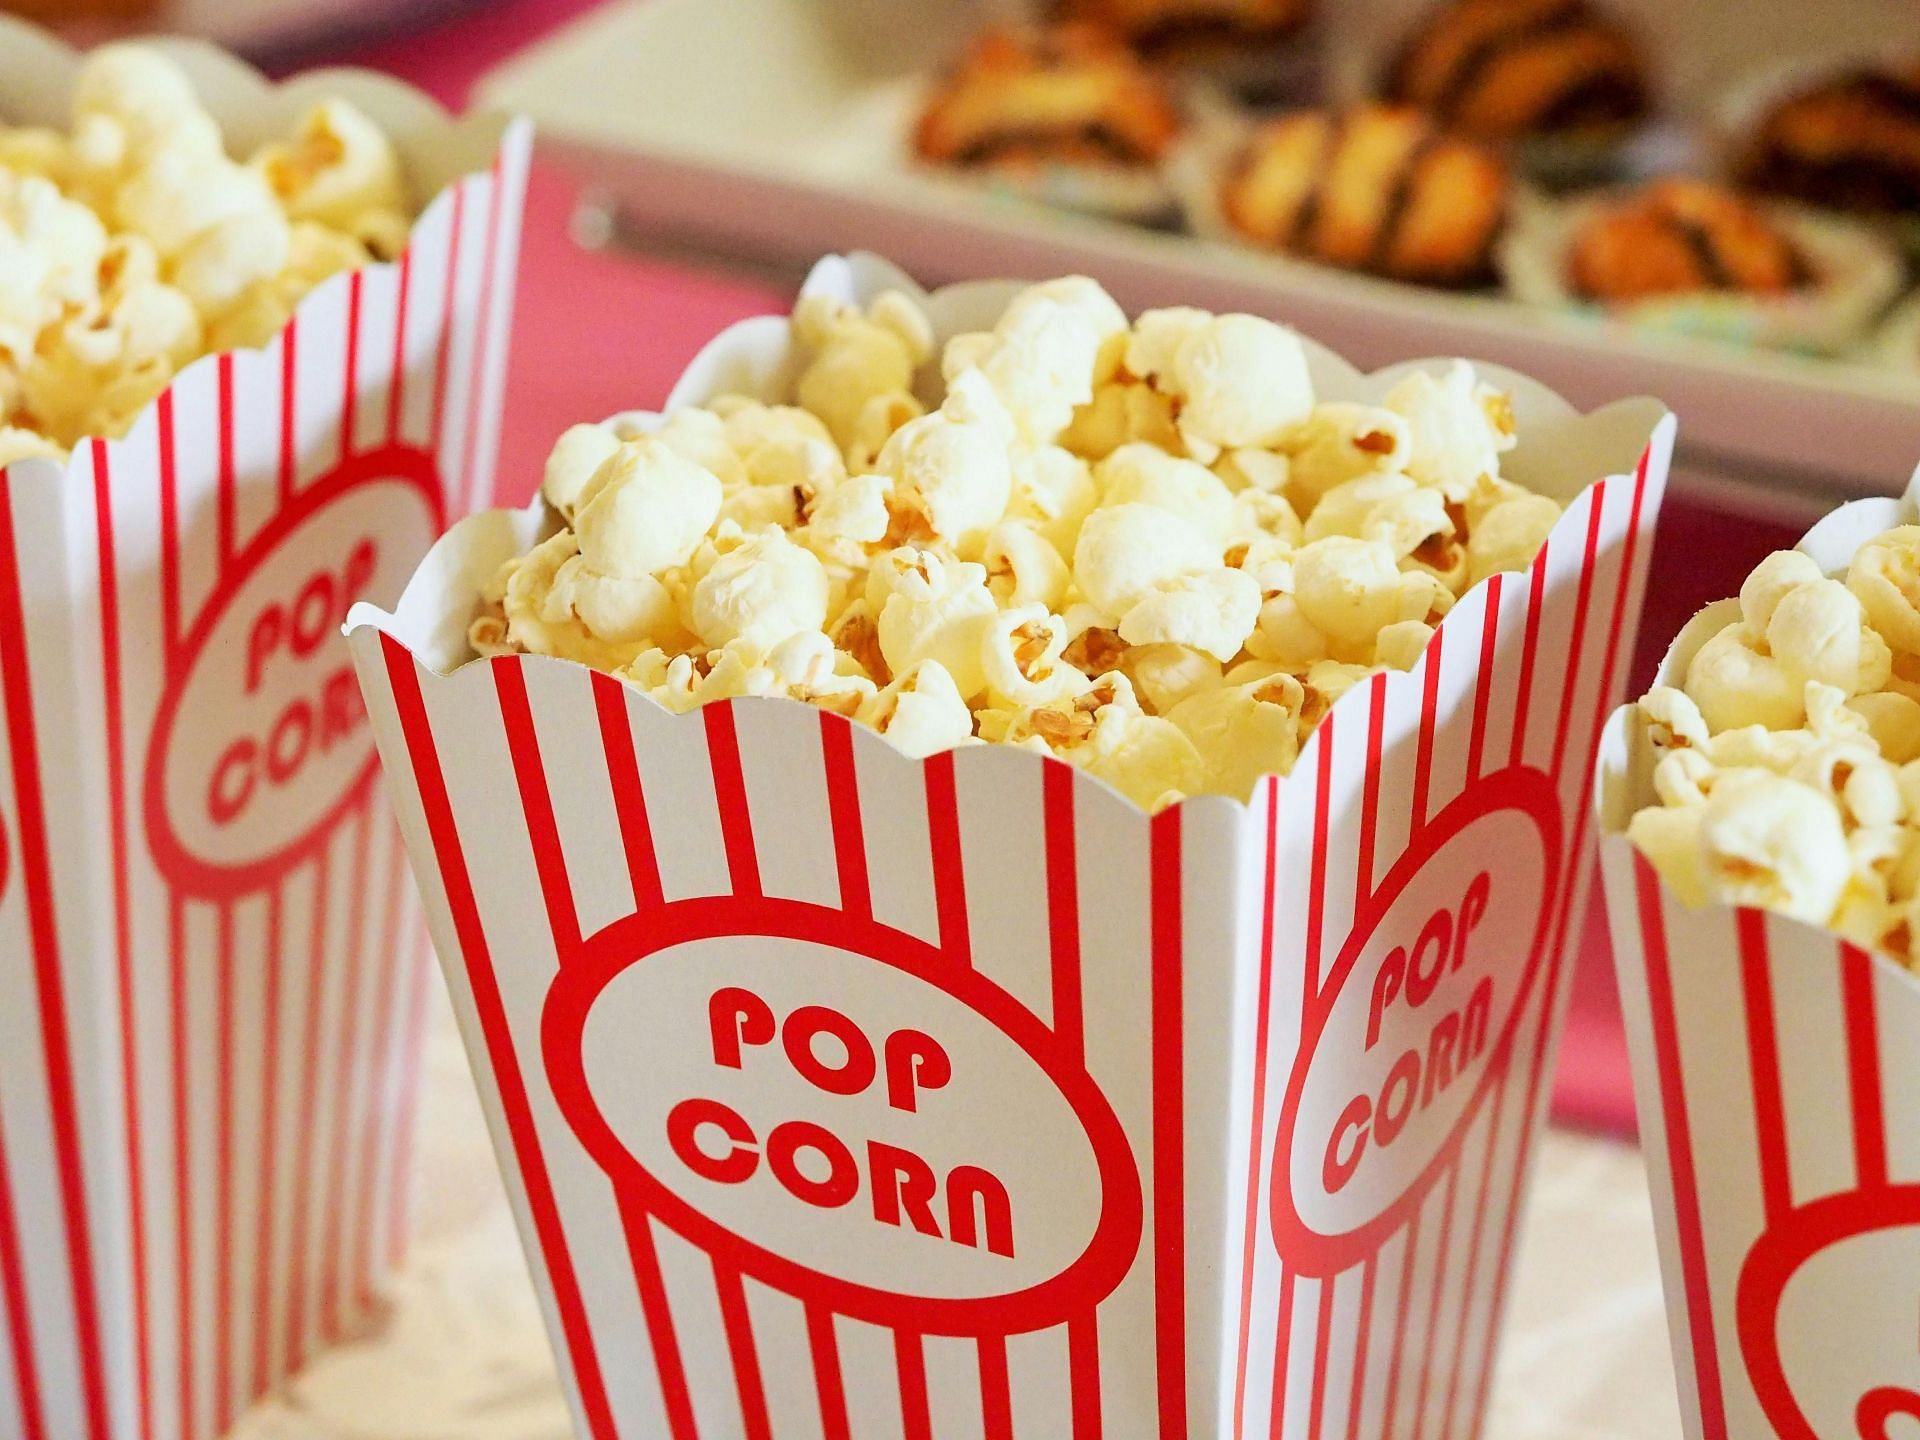 Importance of popcorns (image sourced via Pexels / Photo by Pixabay)